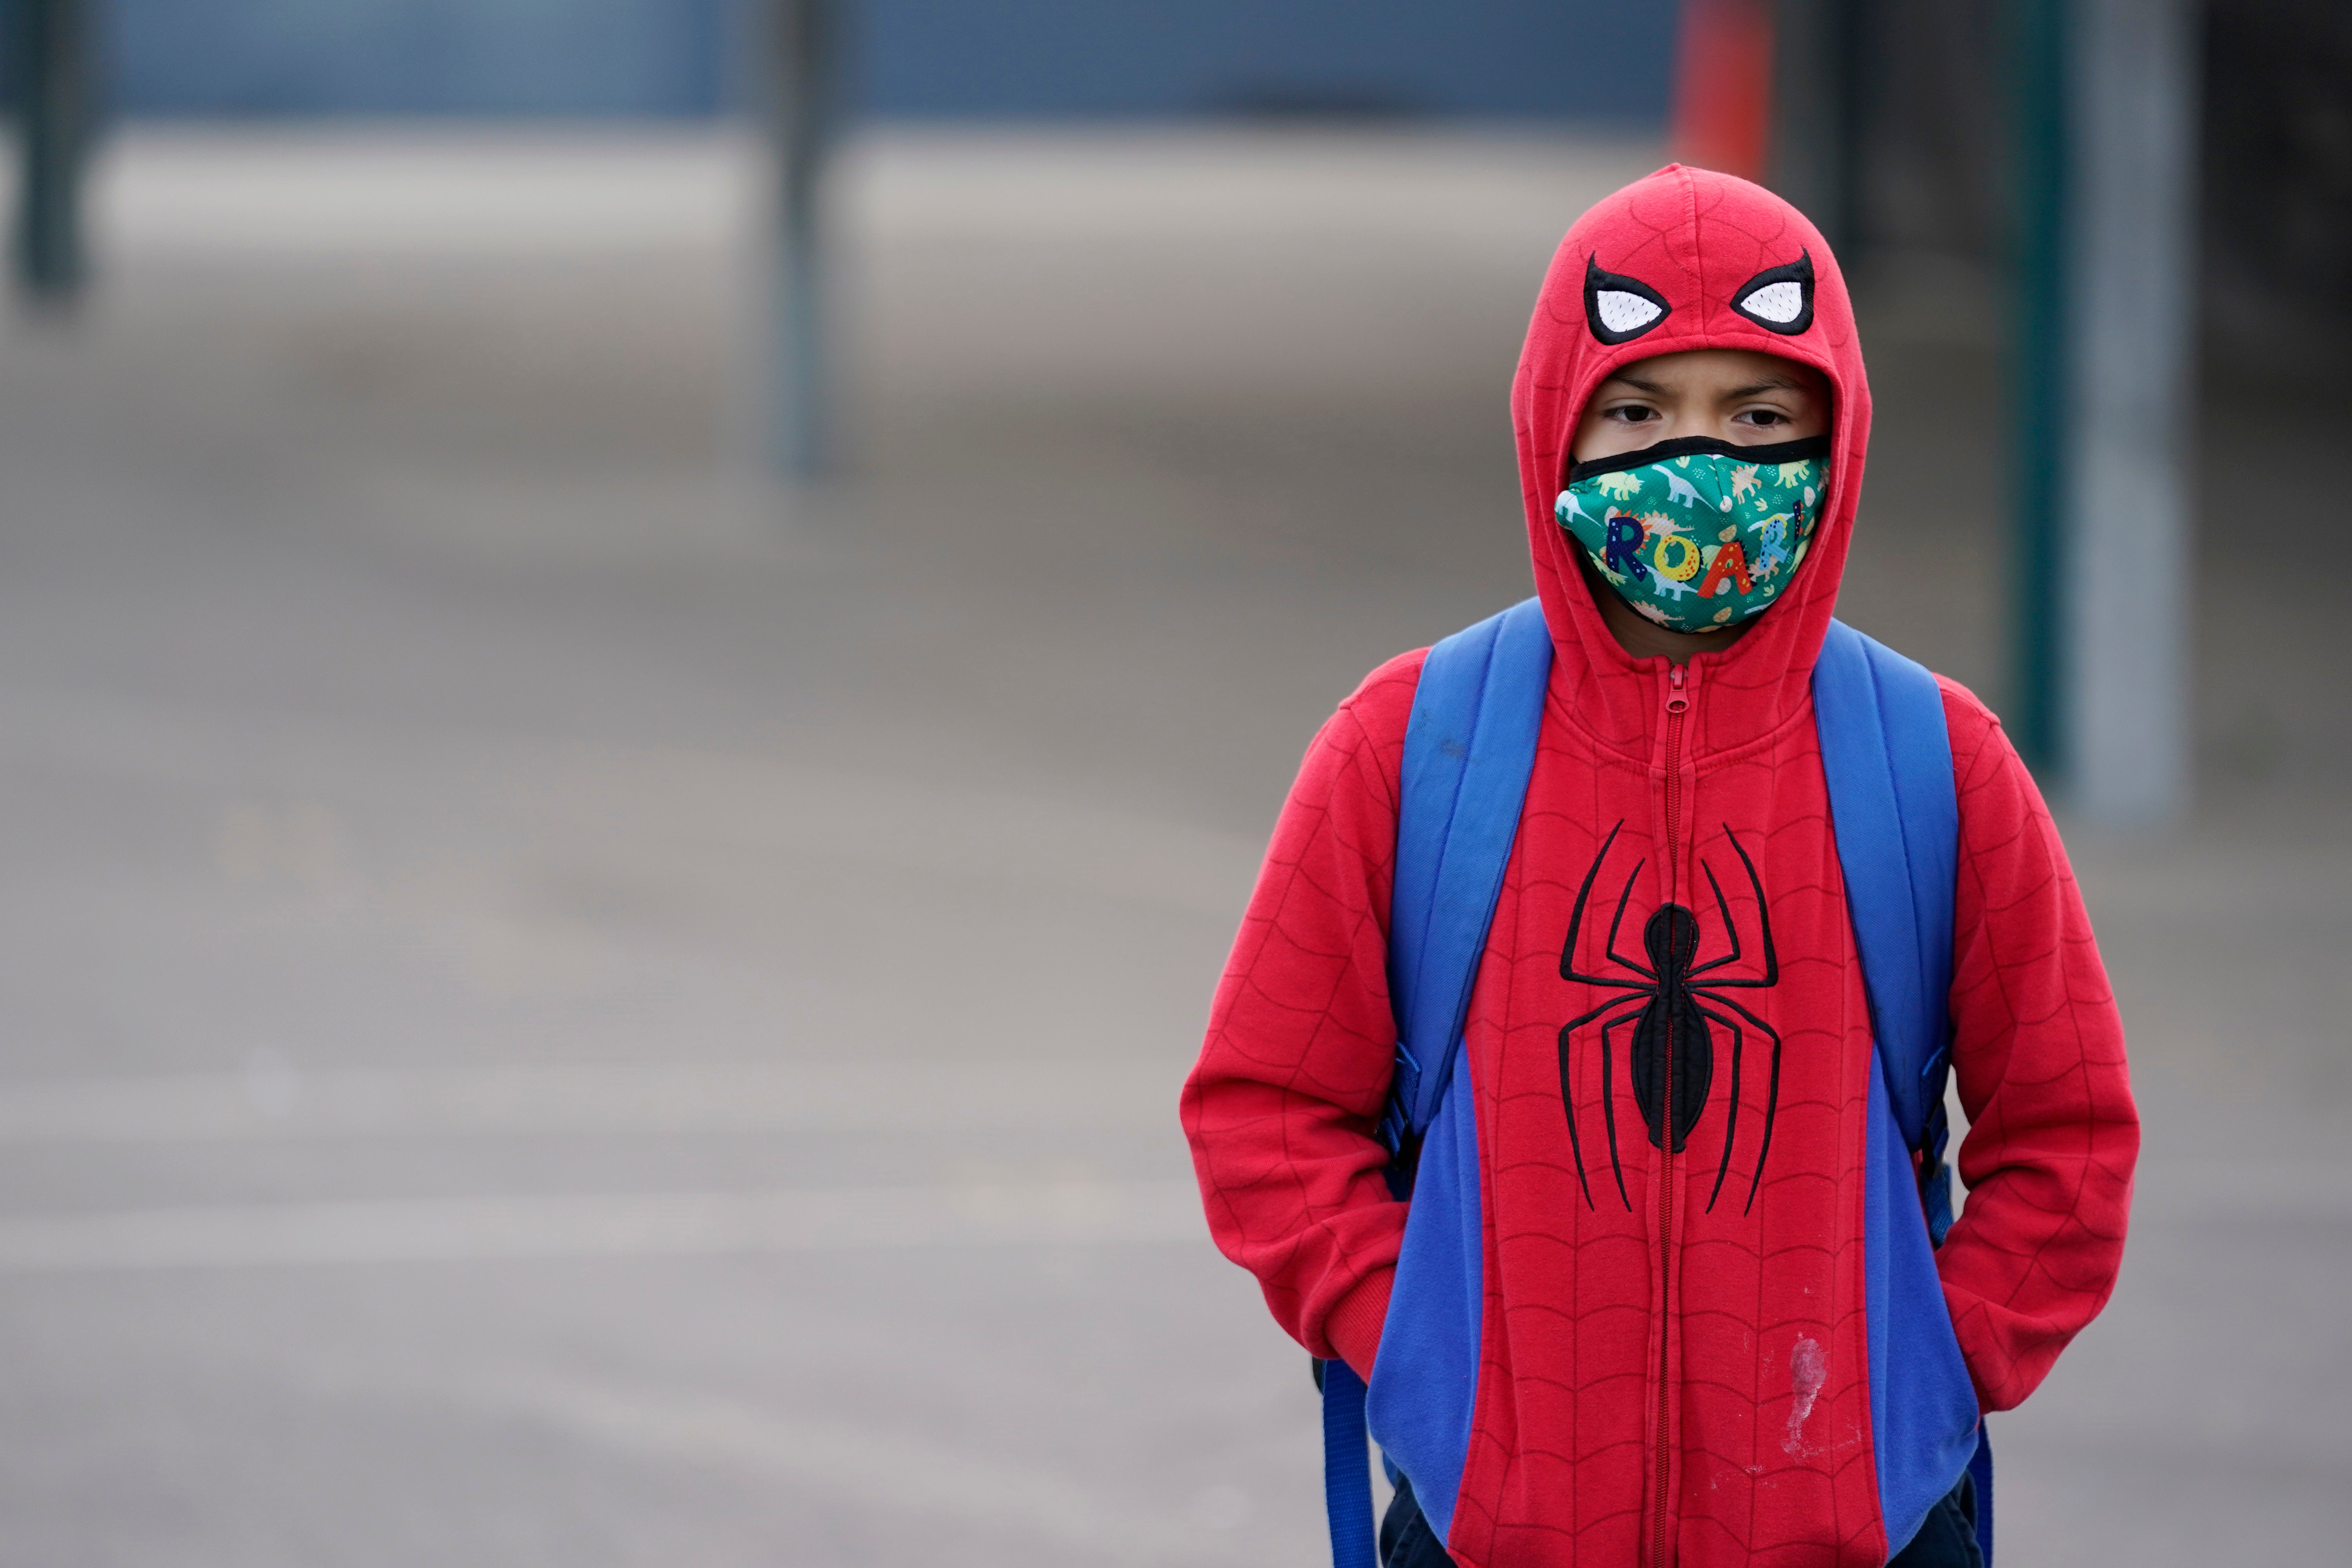 File: A student wears a mask while waiting for class to start amid the Covid pandemic at Washington Elementary School on Wednesday